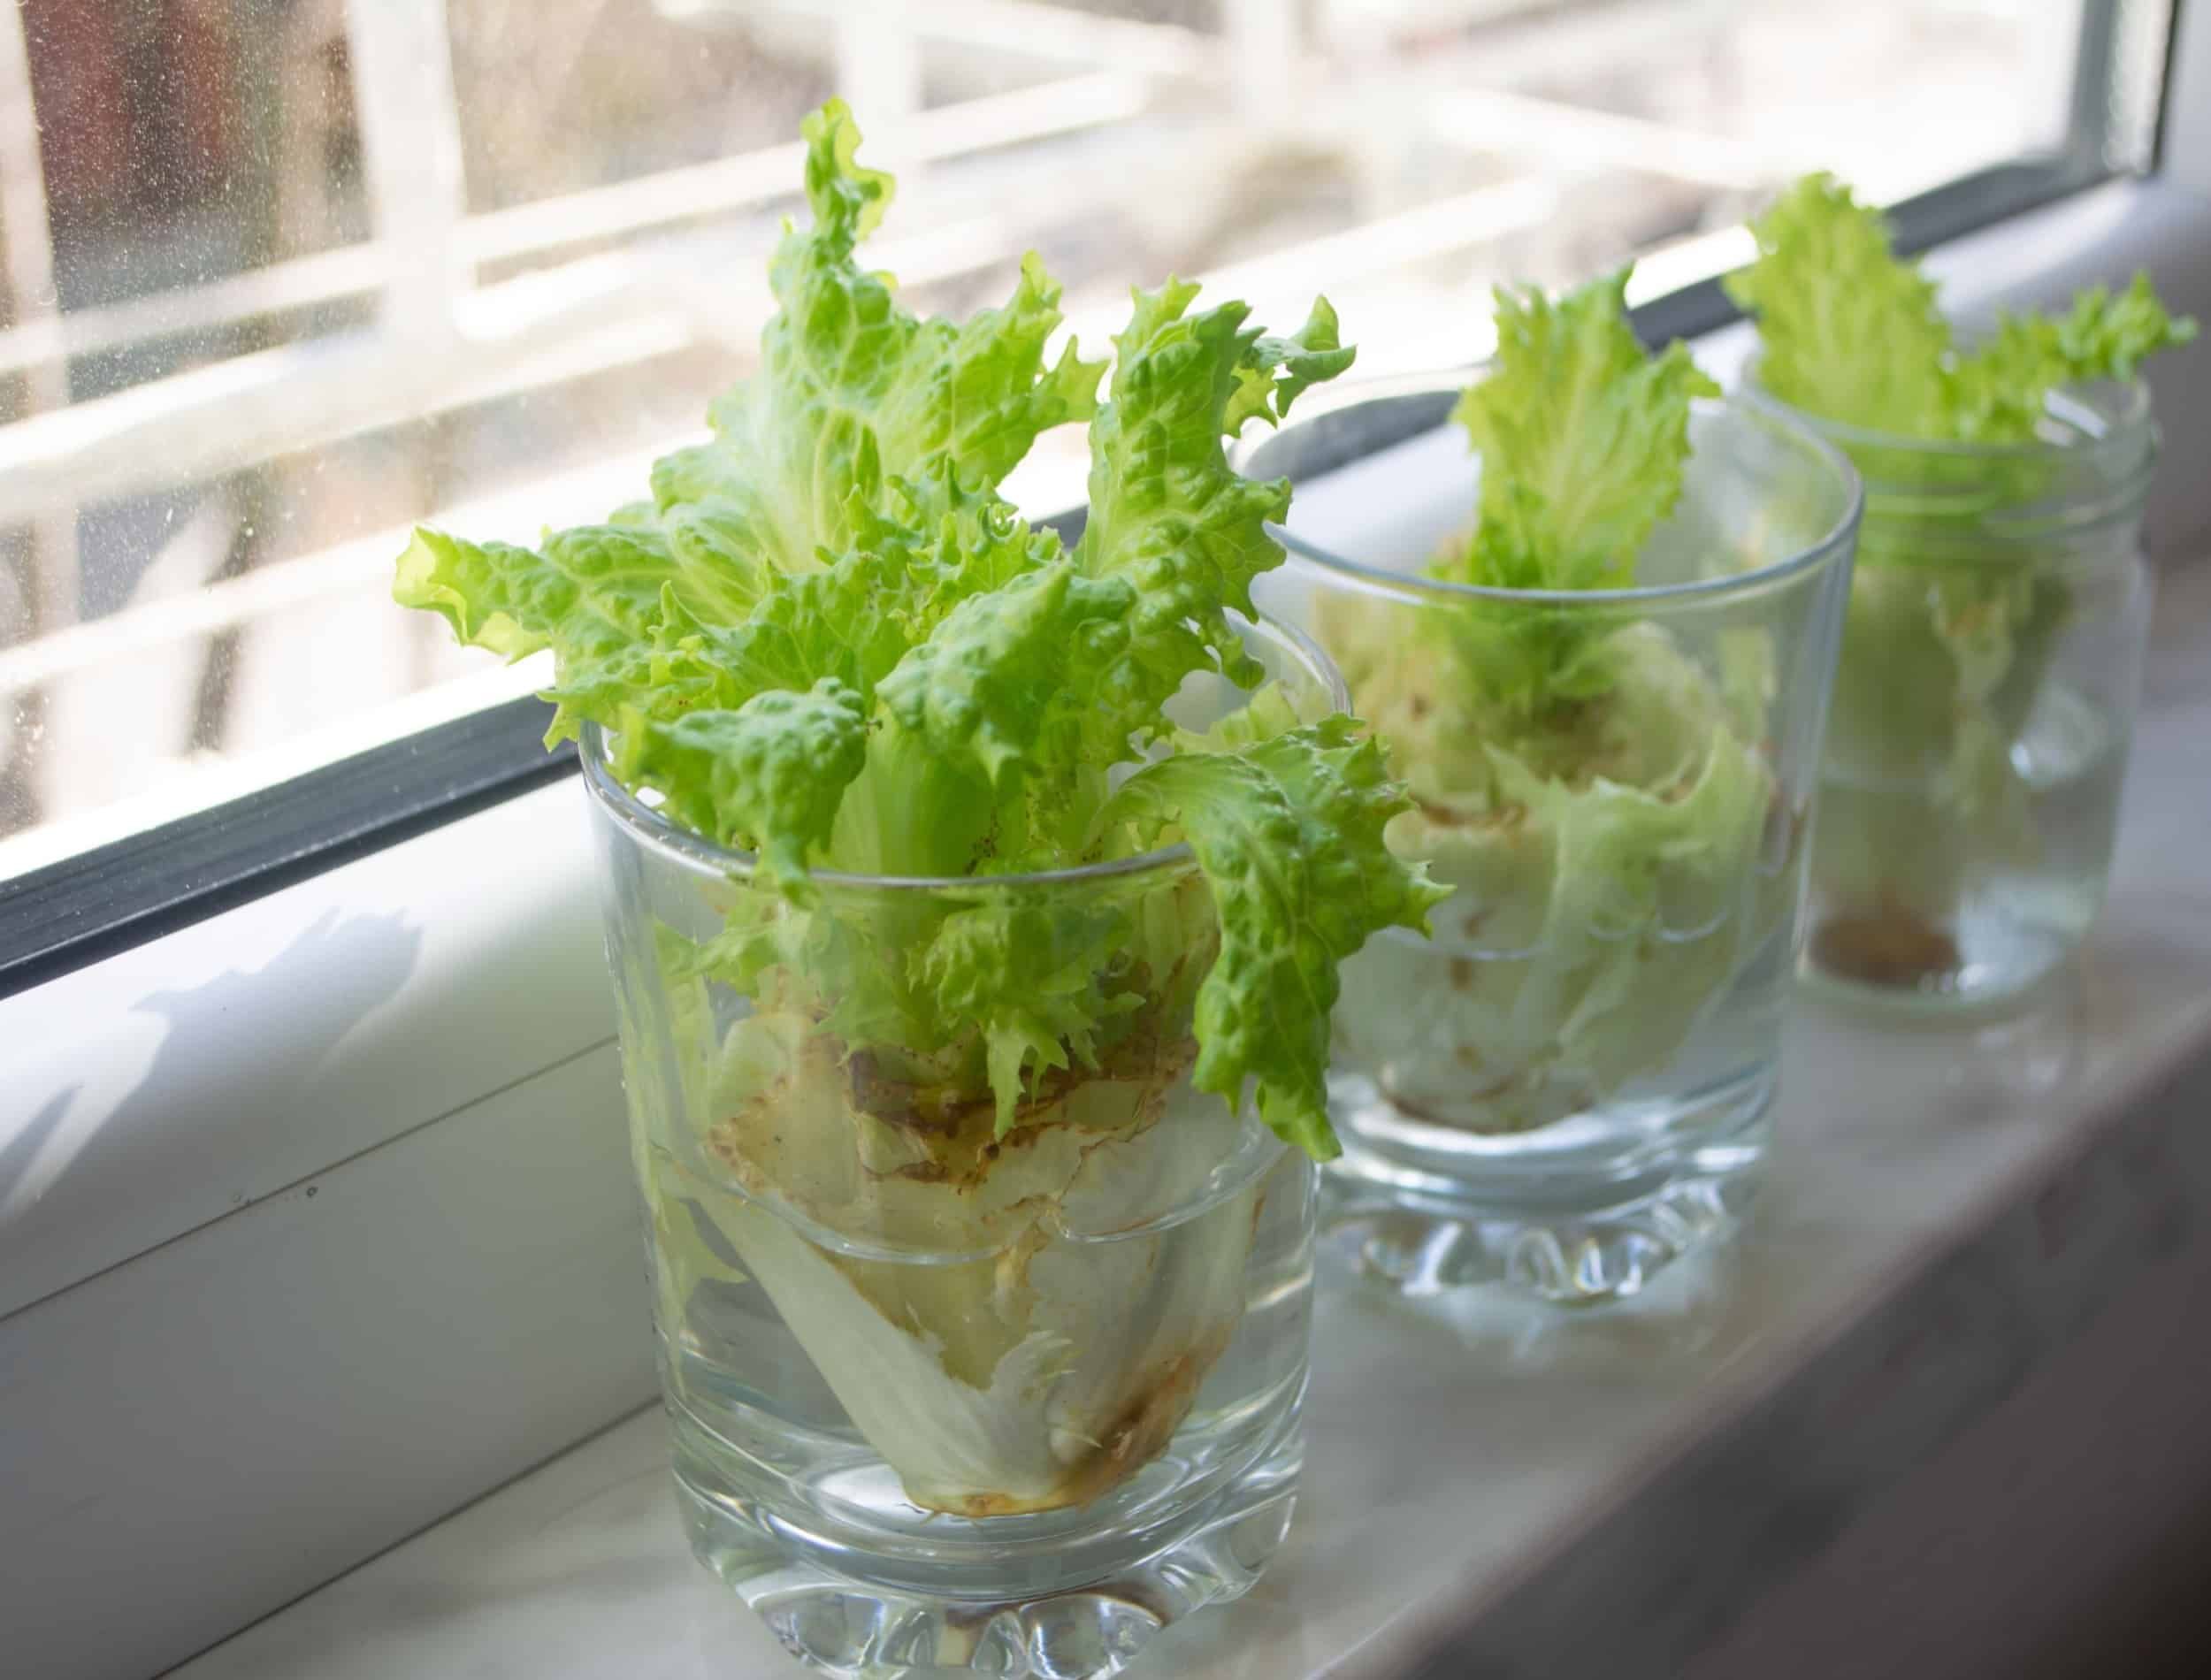 Growing lettuce in water from scraps in kitchen and on windowsill